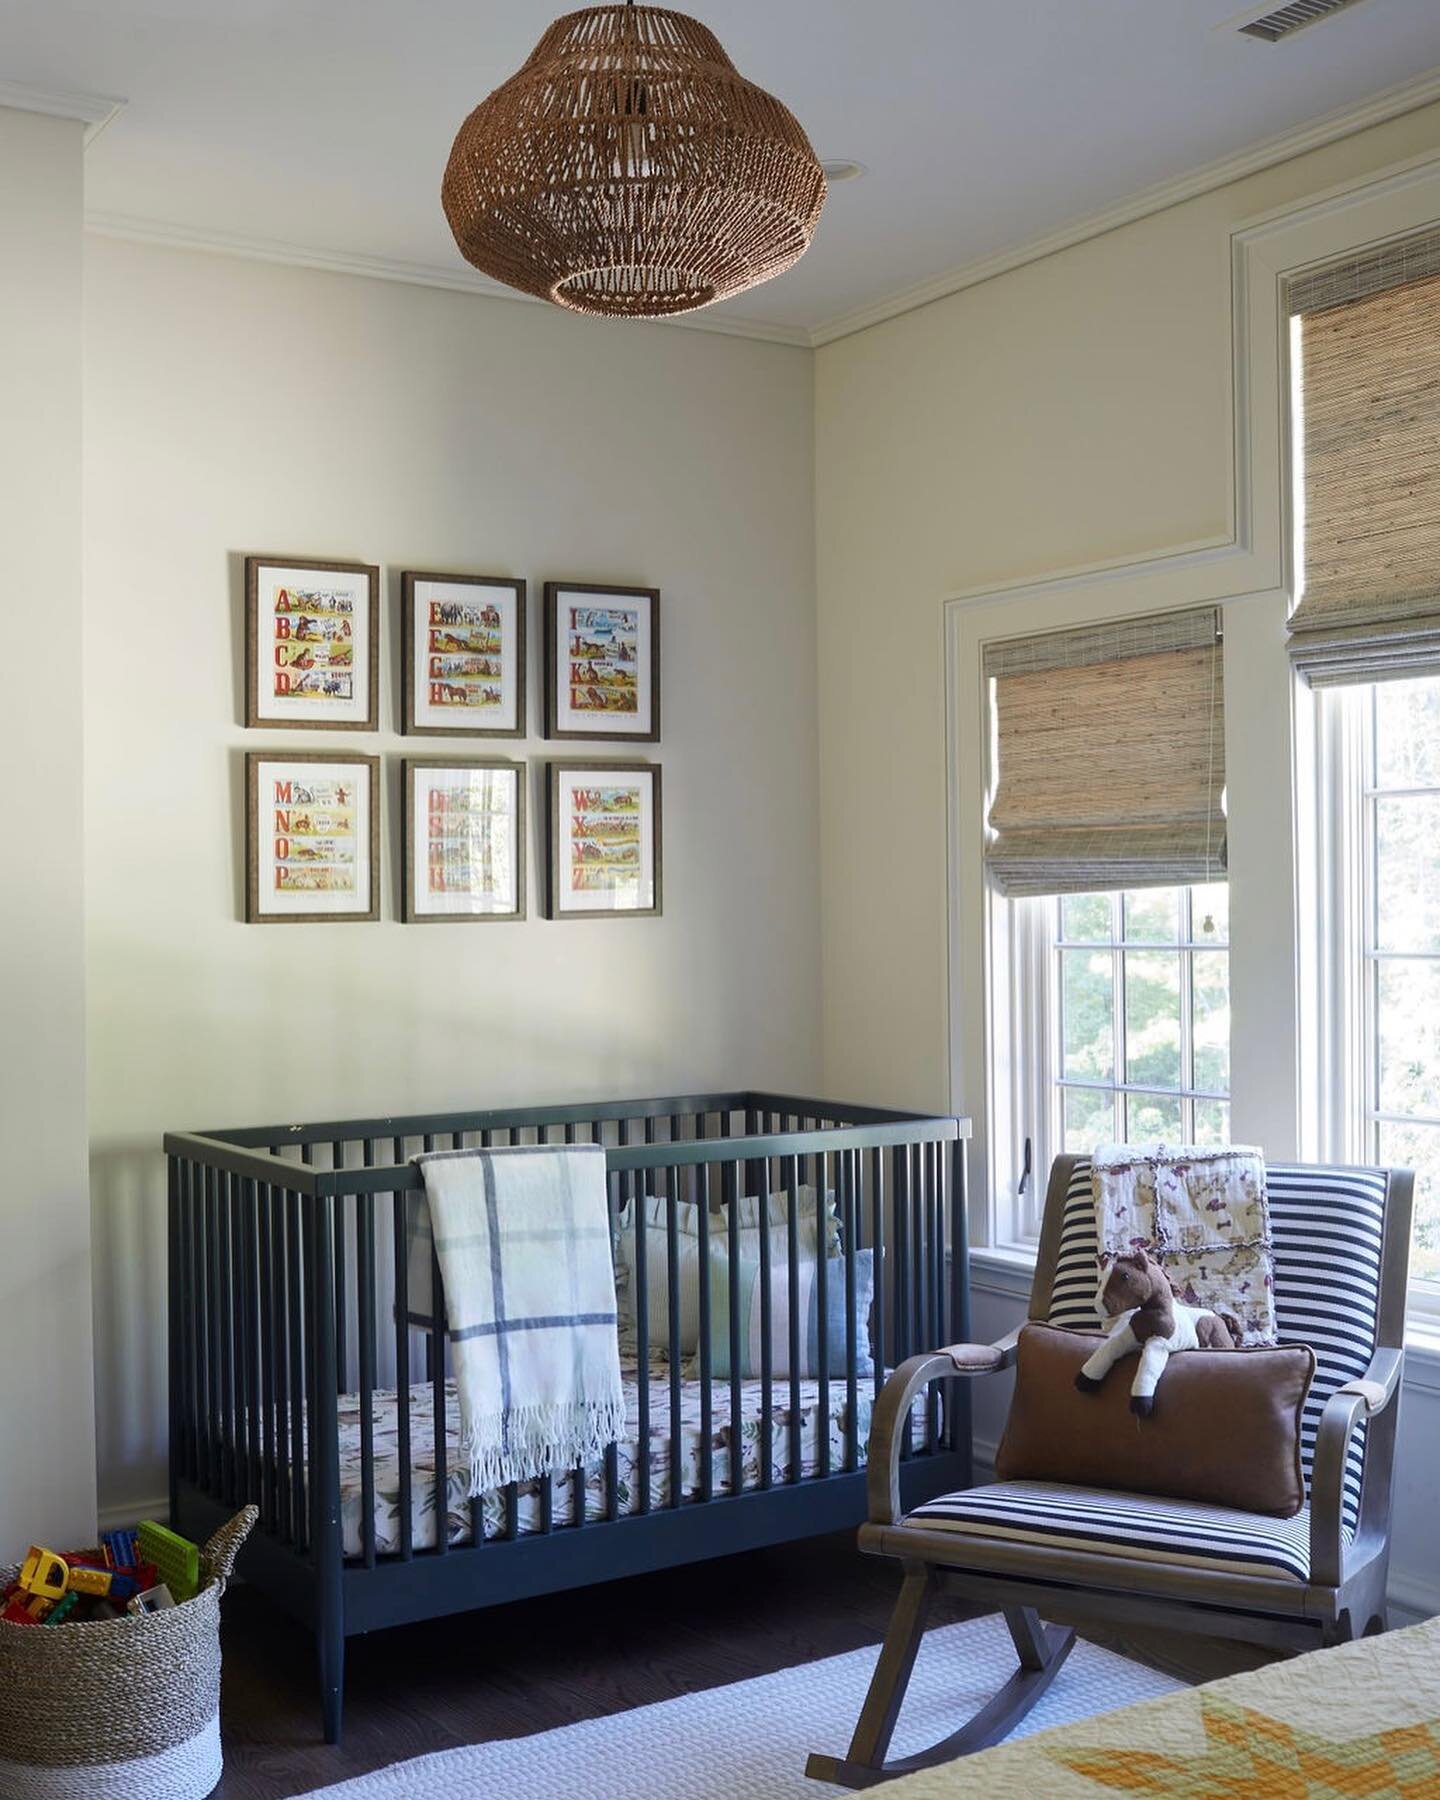 Warm neutrals and touches of seafoam &amp; olive green gives this nursery a sweet yet sophisticated feel that can easily transition to a guest room when needed 🧩🧸💭 ✨

📷: @jallsopp 

#nurserydesign #nurseryideas #interiordesign #homedesign #custom